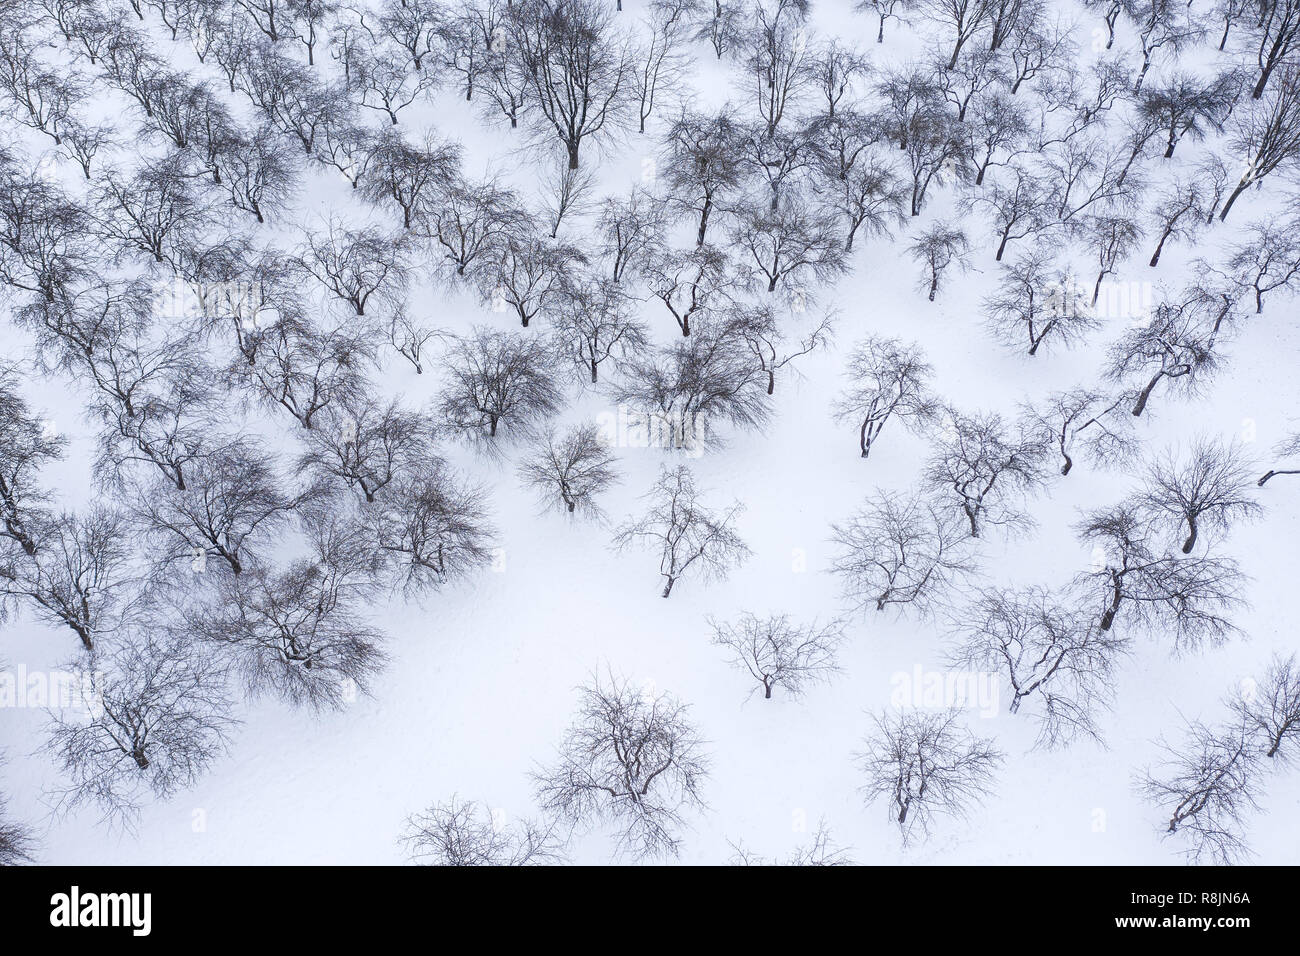 orchard with apple trees standing in rows on cold winter day. aerial photo Stock Photo